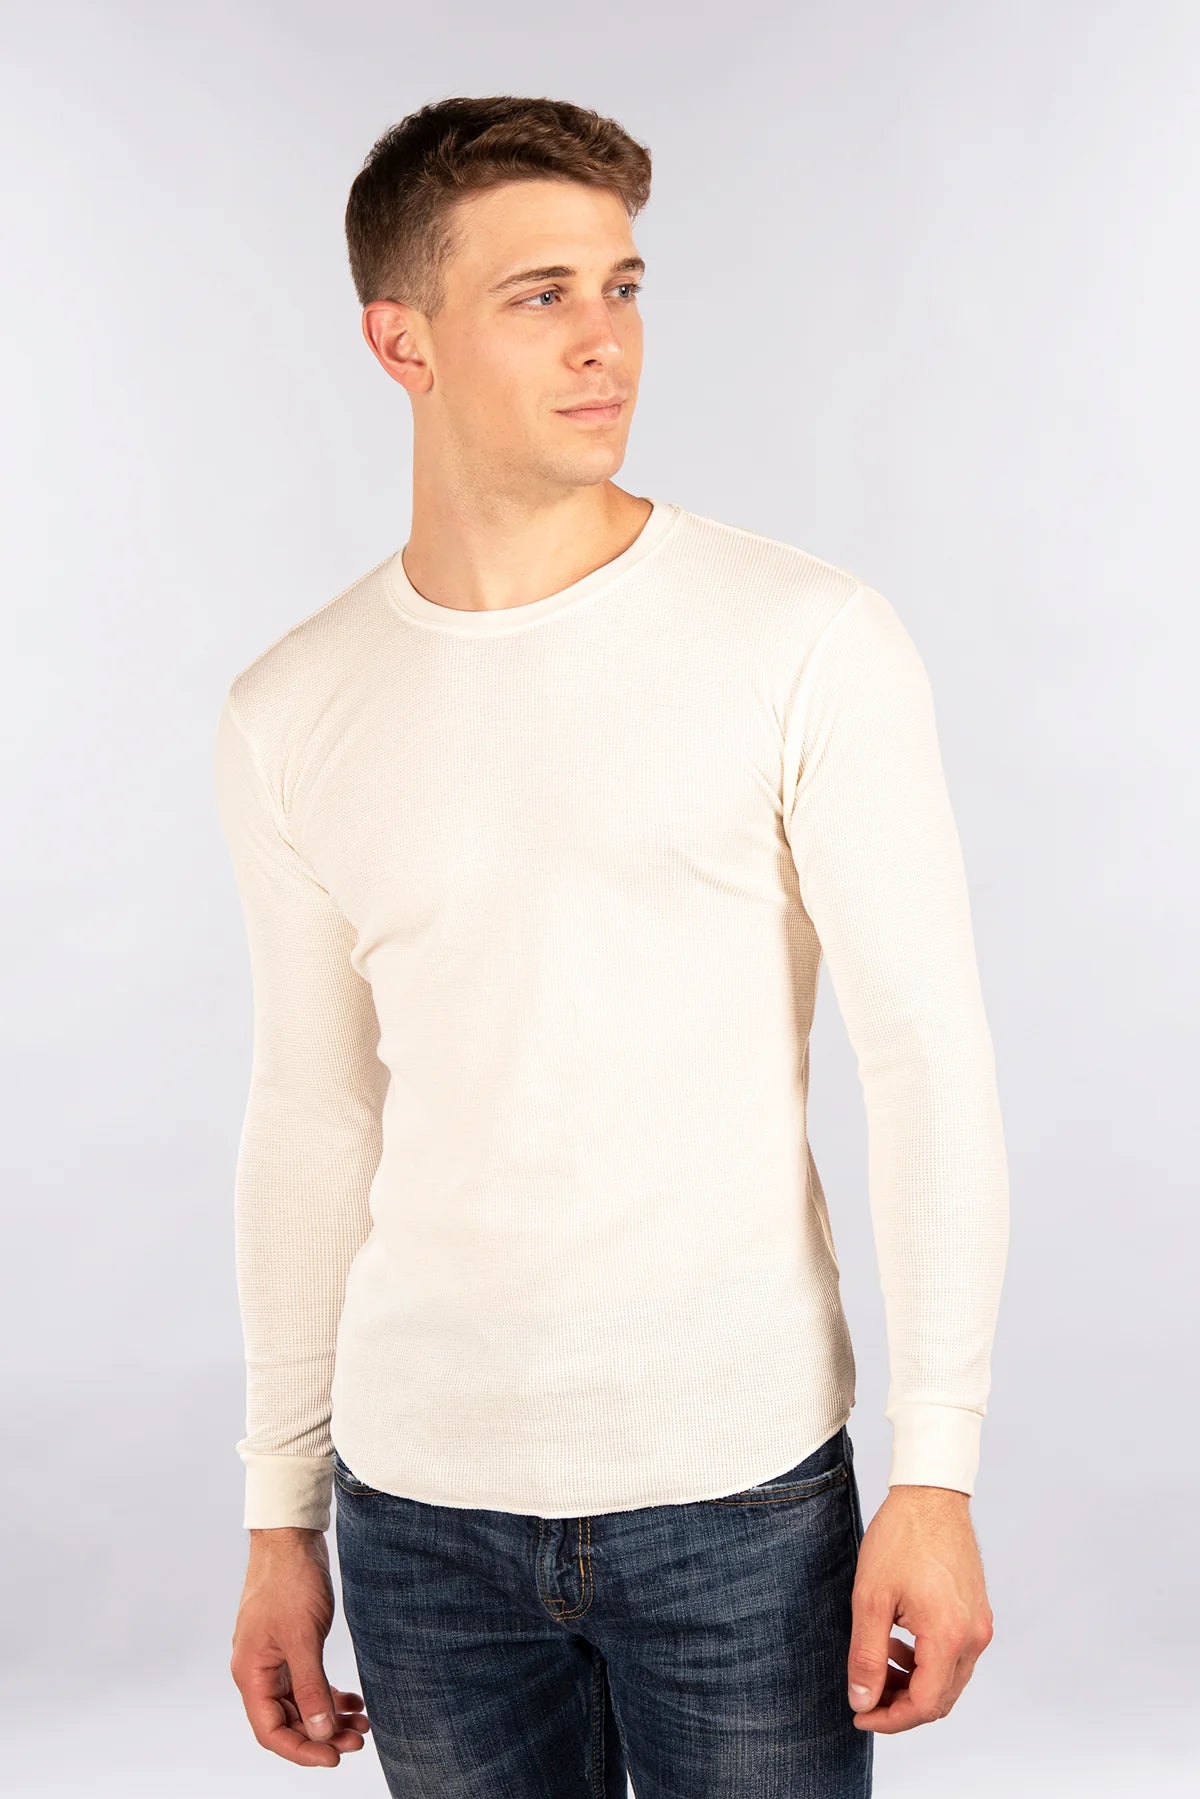 City Lab - Fitted Thermal Shirt - Cream